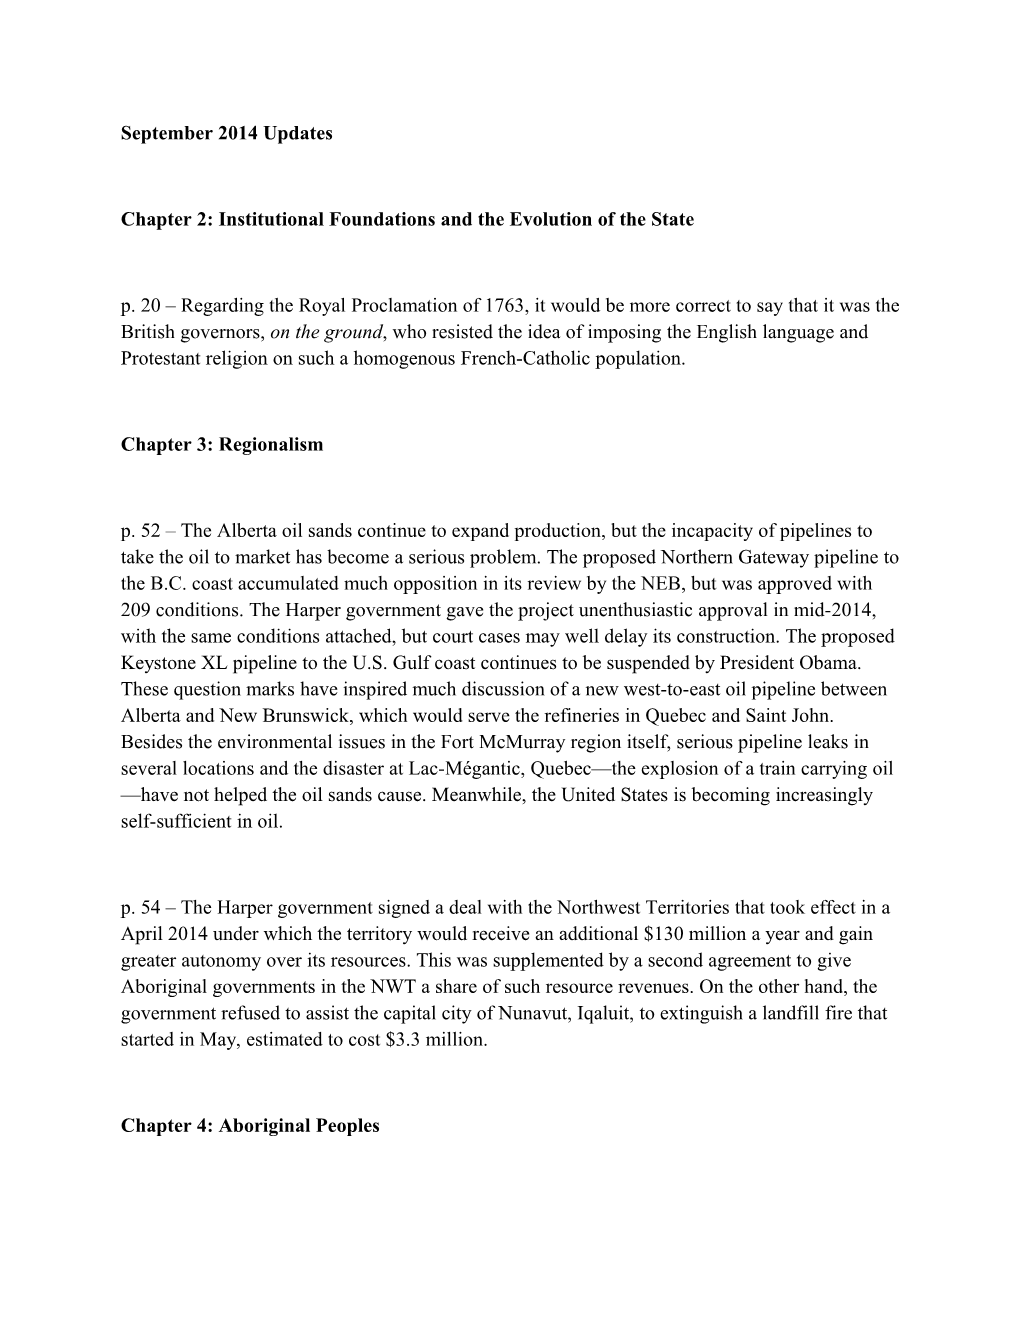 Chapter 2: Institutional Foundations and the Evolution of the State